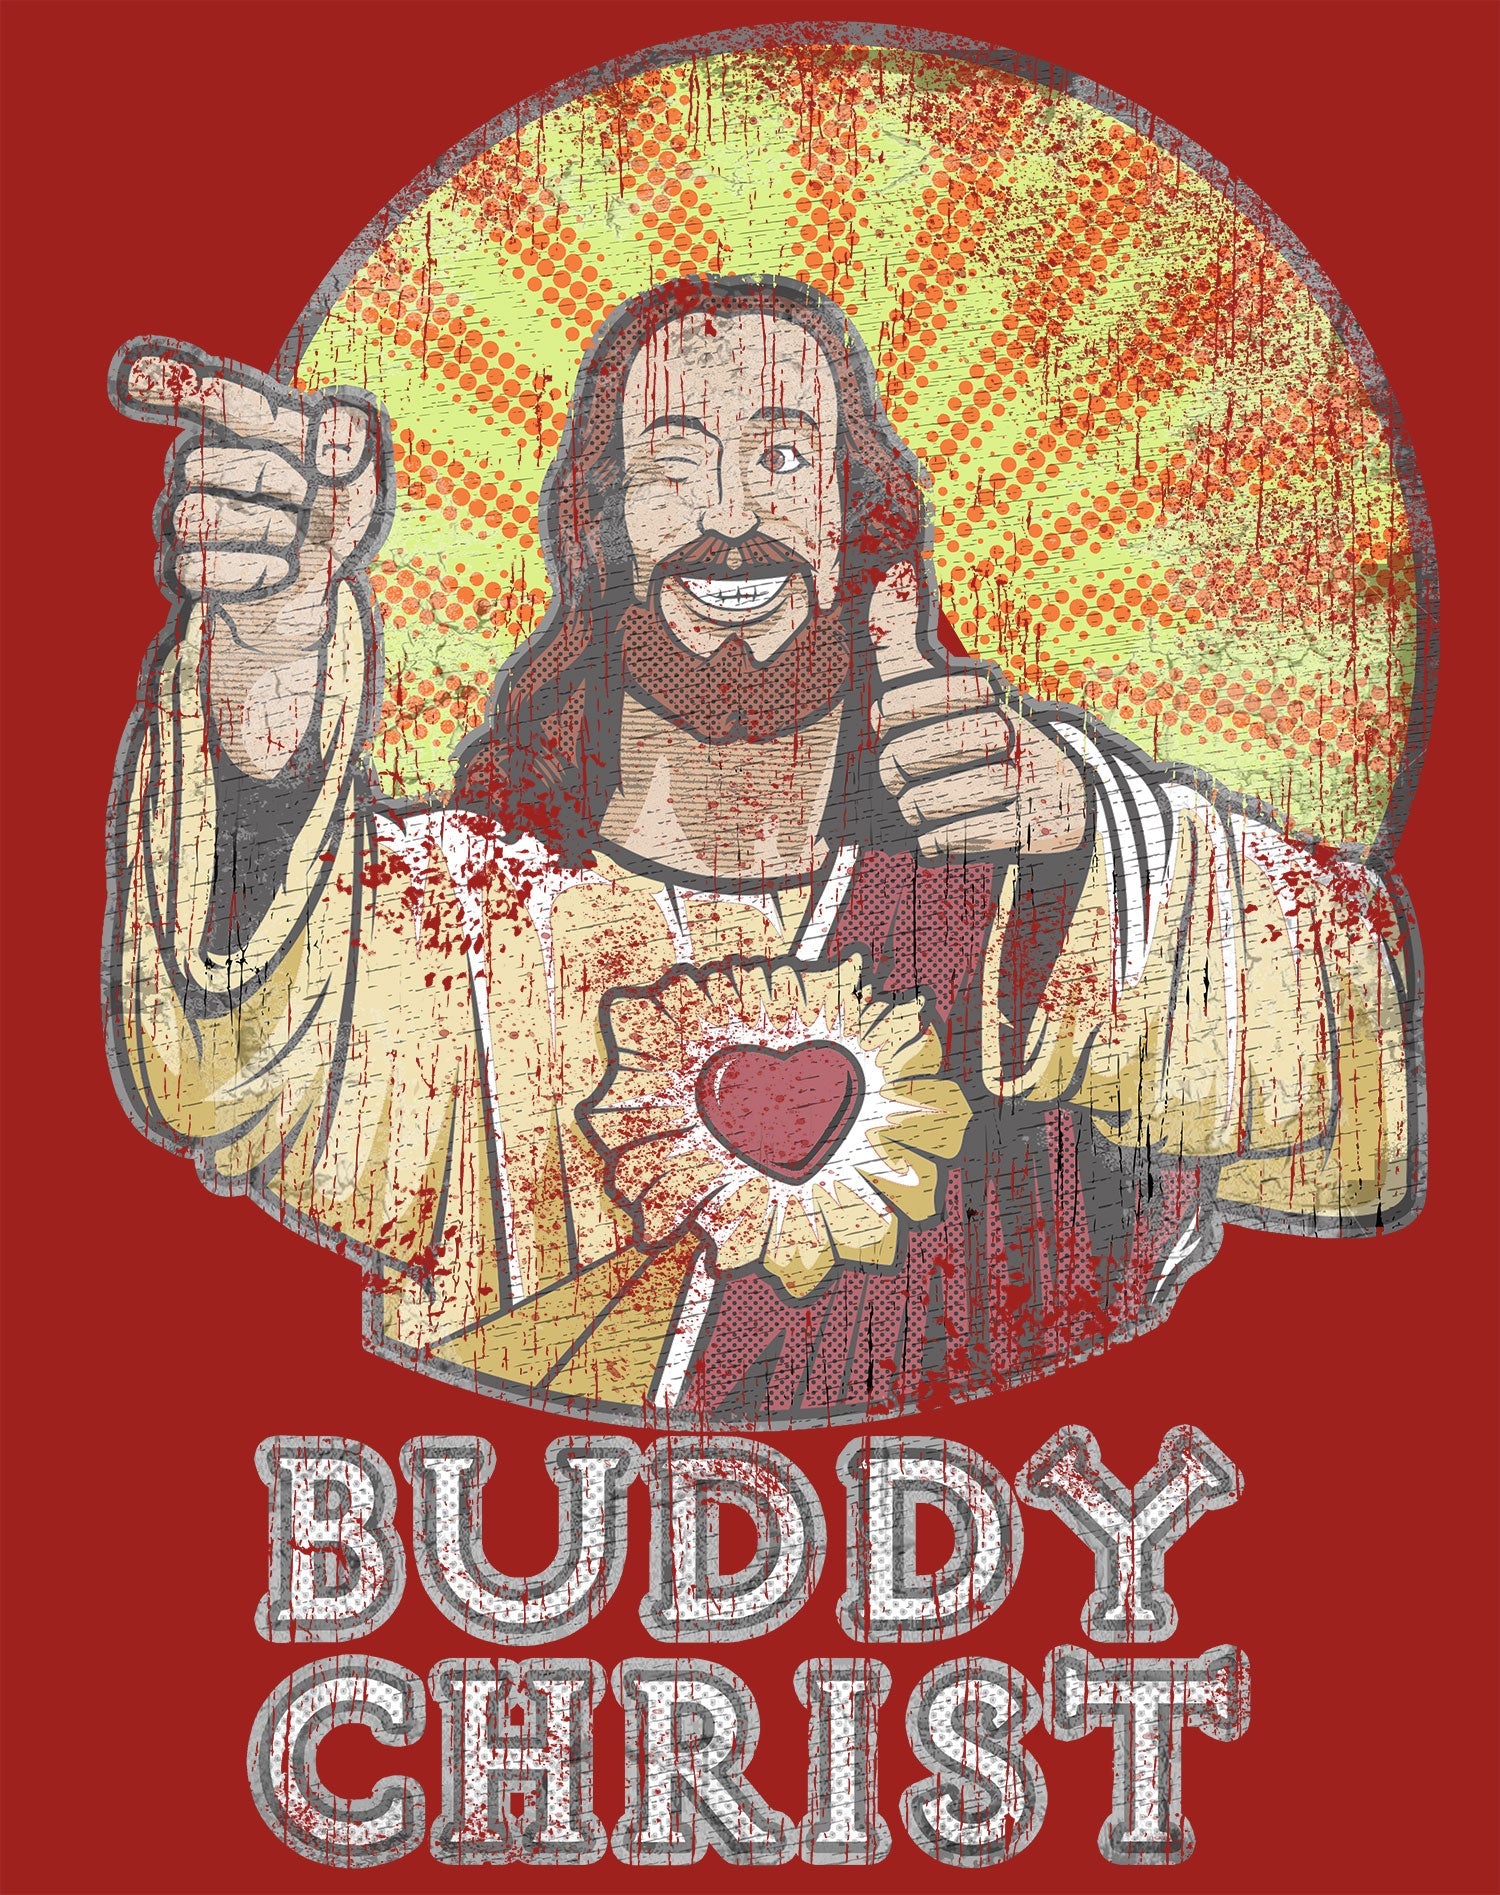 Kevin Smith View Askewniverse Buddy Christ Got Summer Vintage Variant Official Sweatshirt